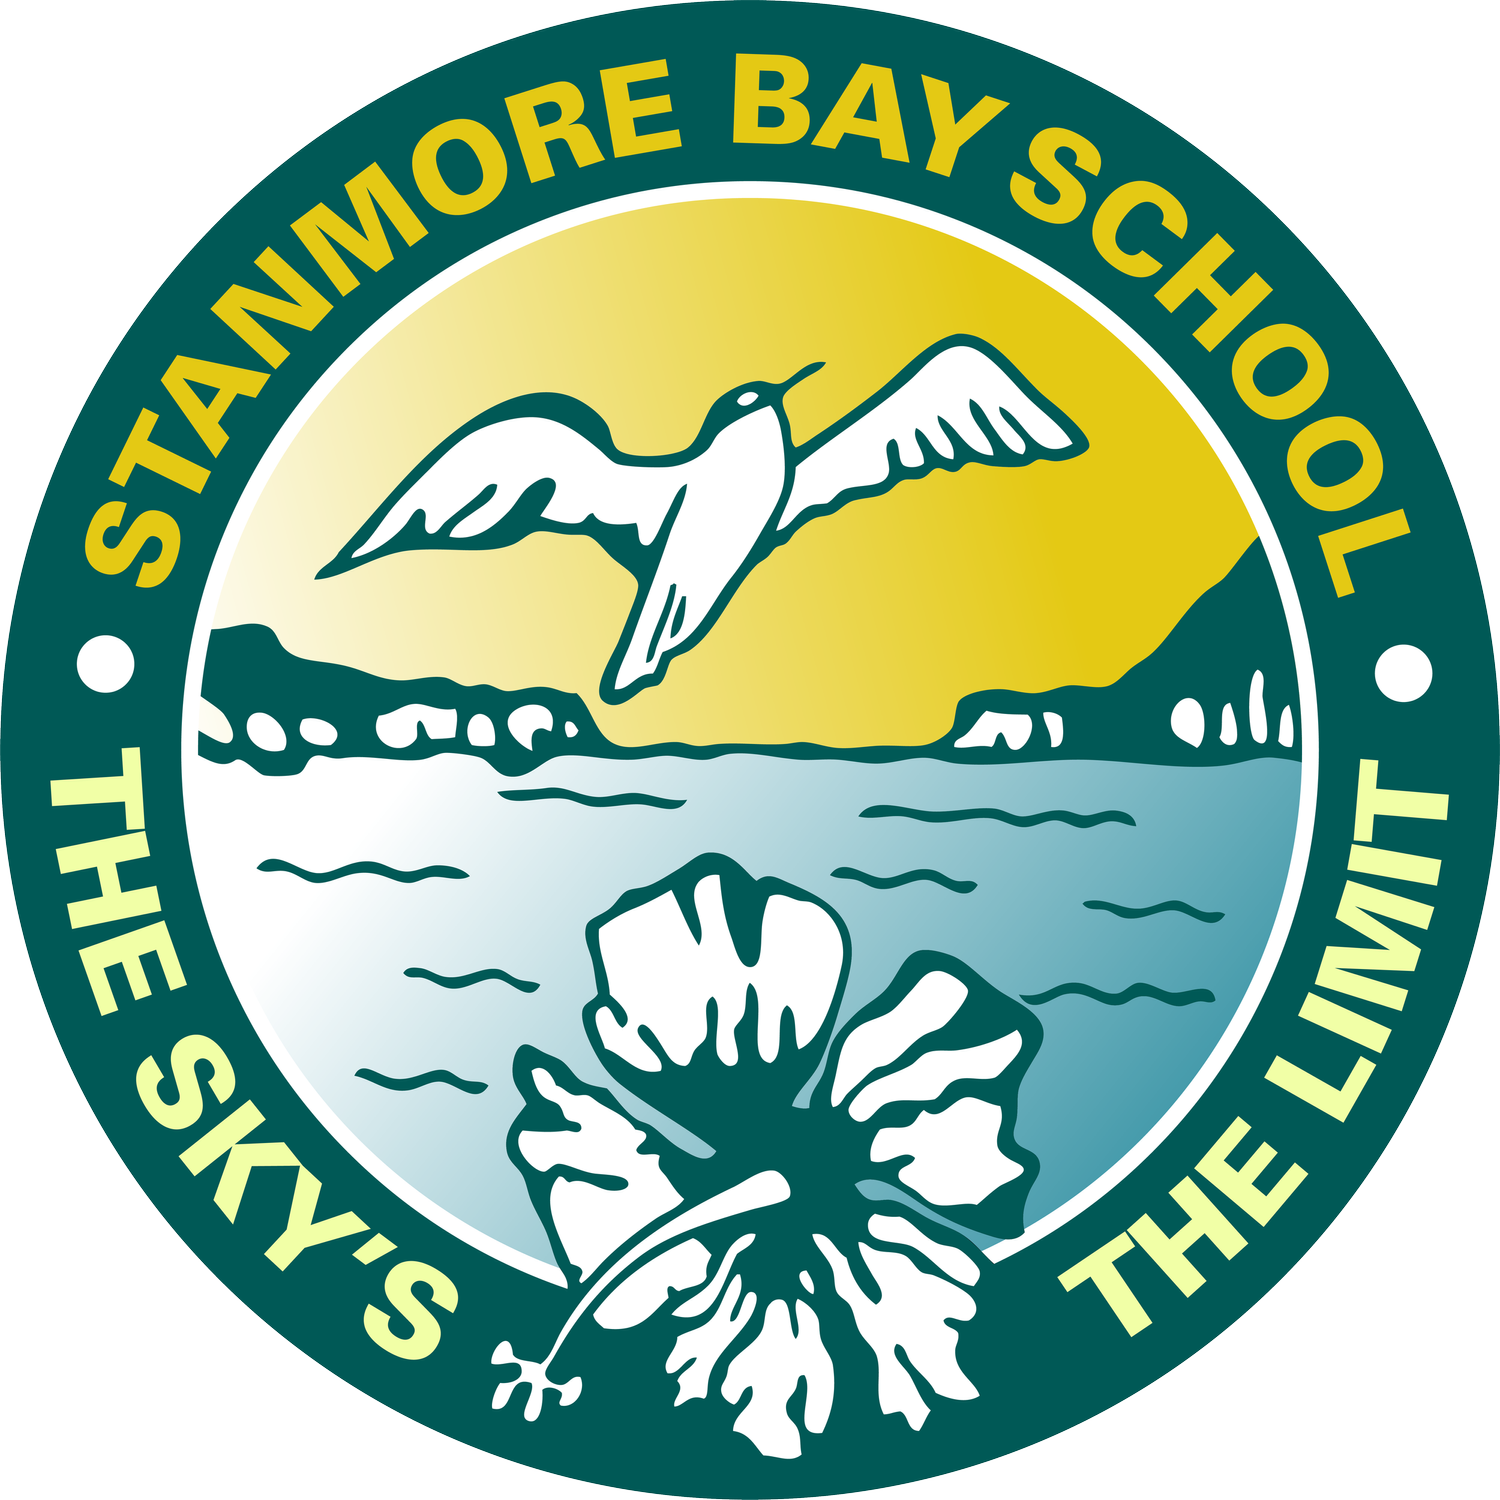 Stanmore Bay School